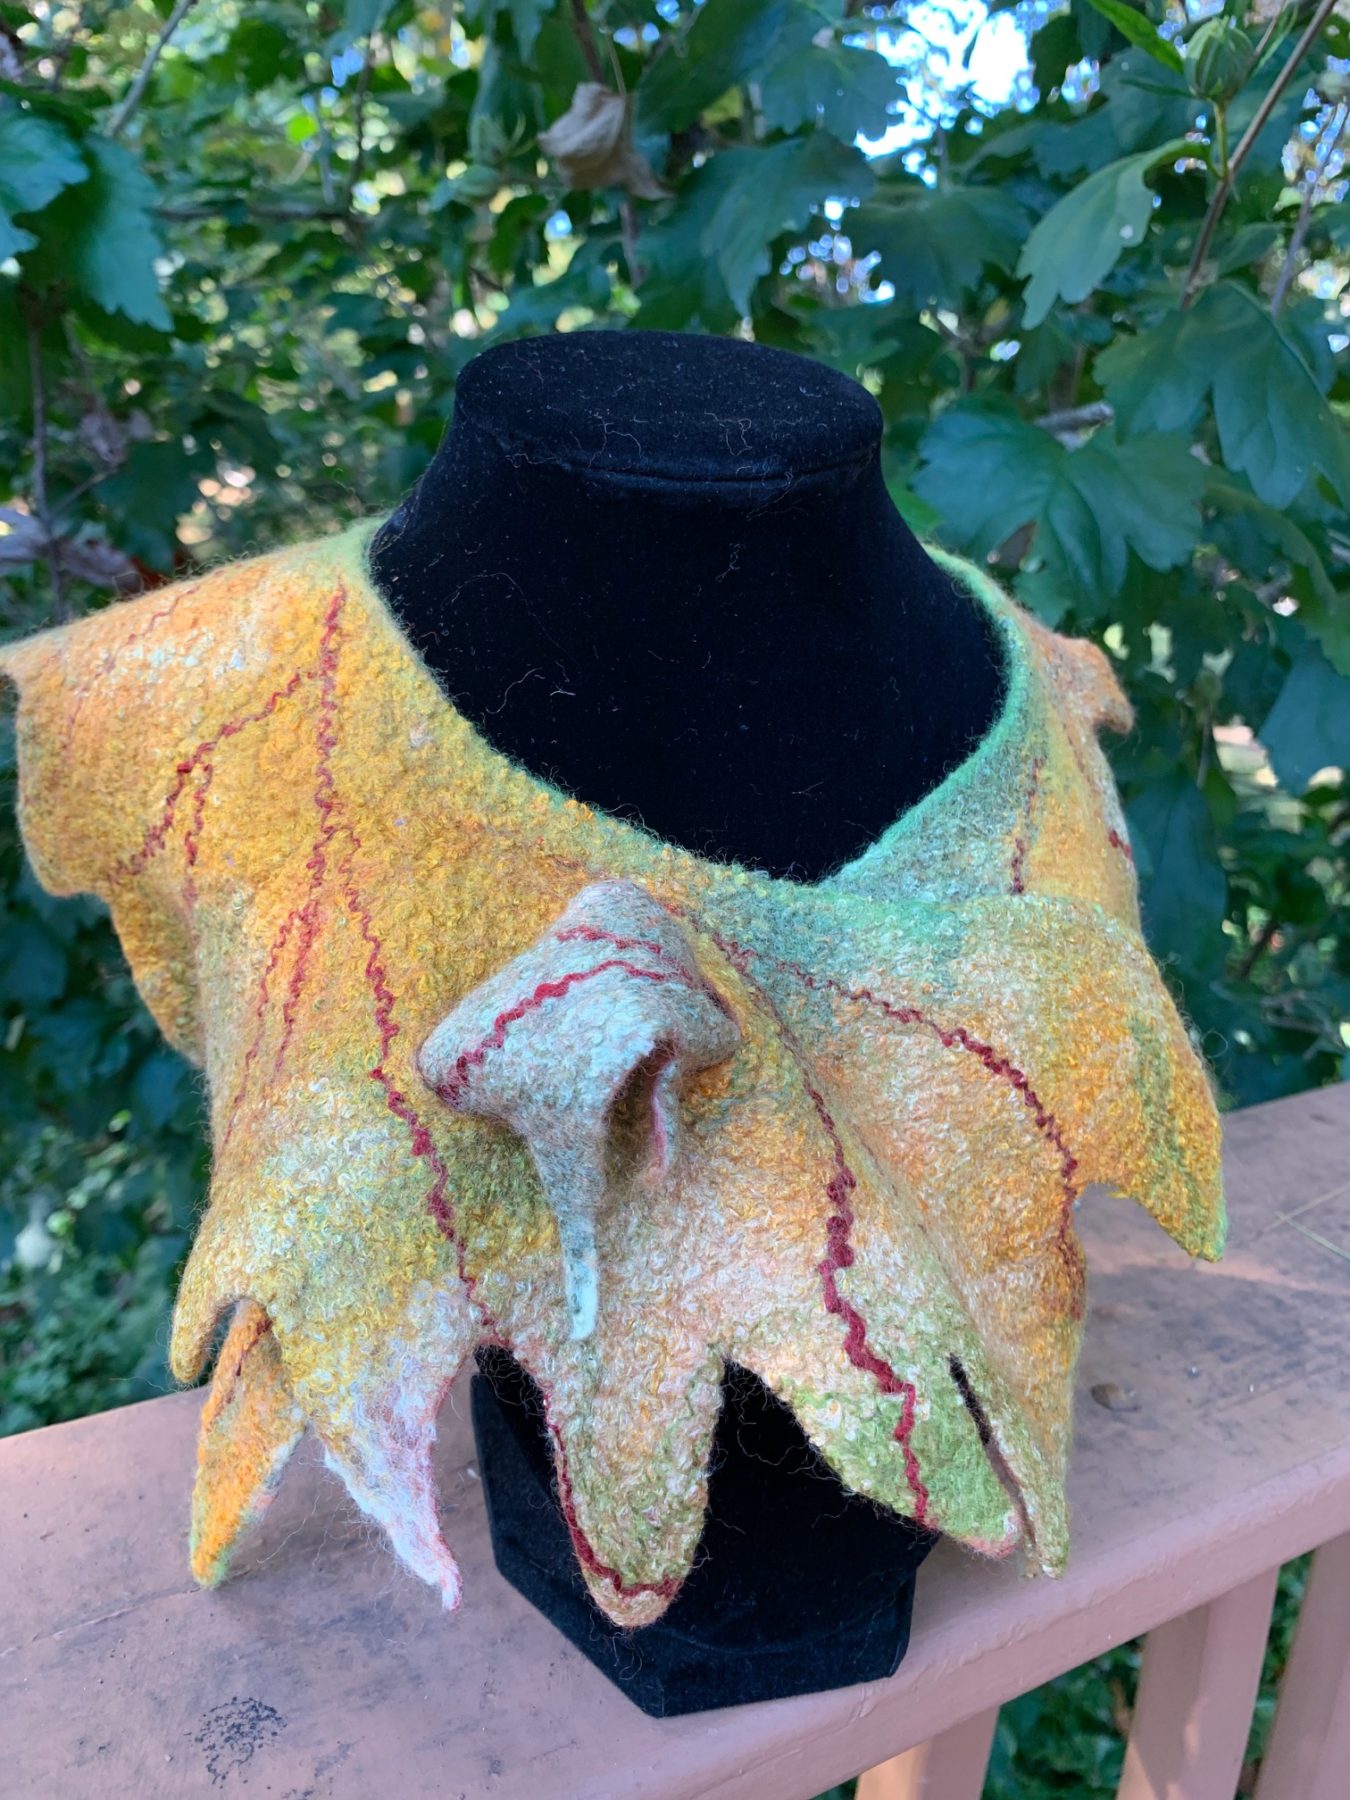 My goal is to create various forms of felt, develop broad possibilities of feltmaking,  and educate the public about the hand made process of felting  using natural fibers and dyes.   My latest work with leather and gemstones is a process of taking a new path in creative process, challenges, and growing.